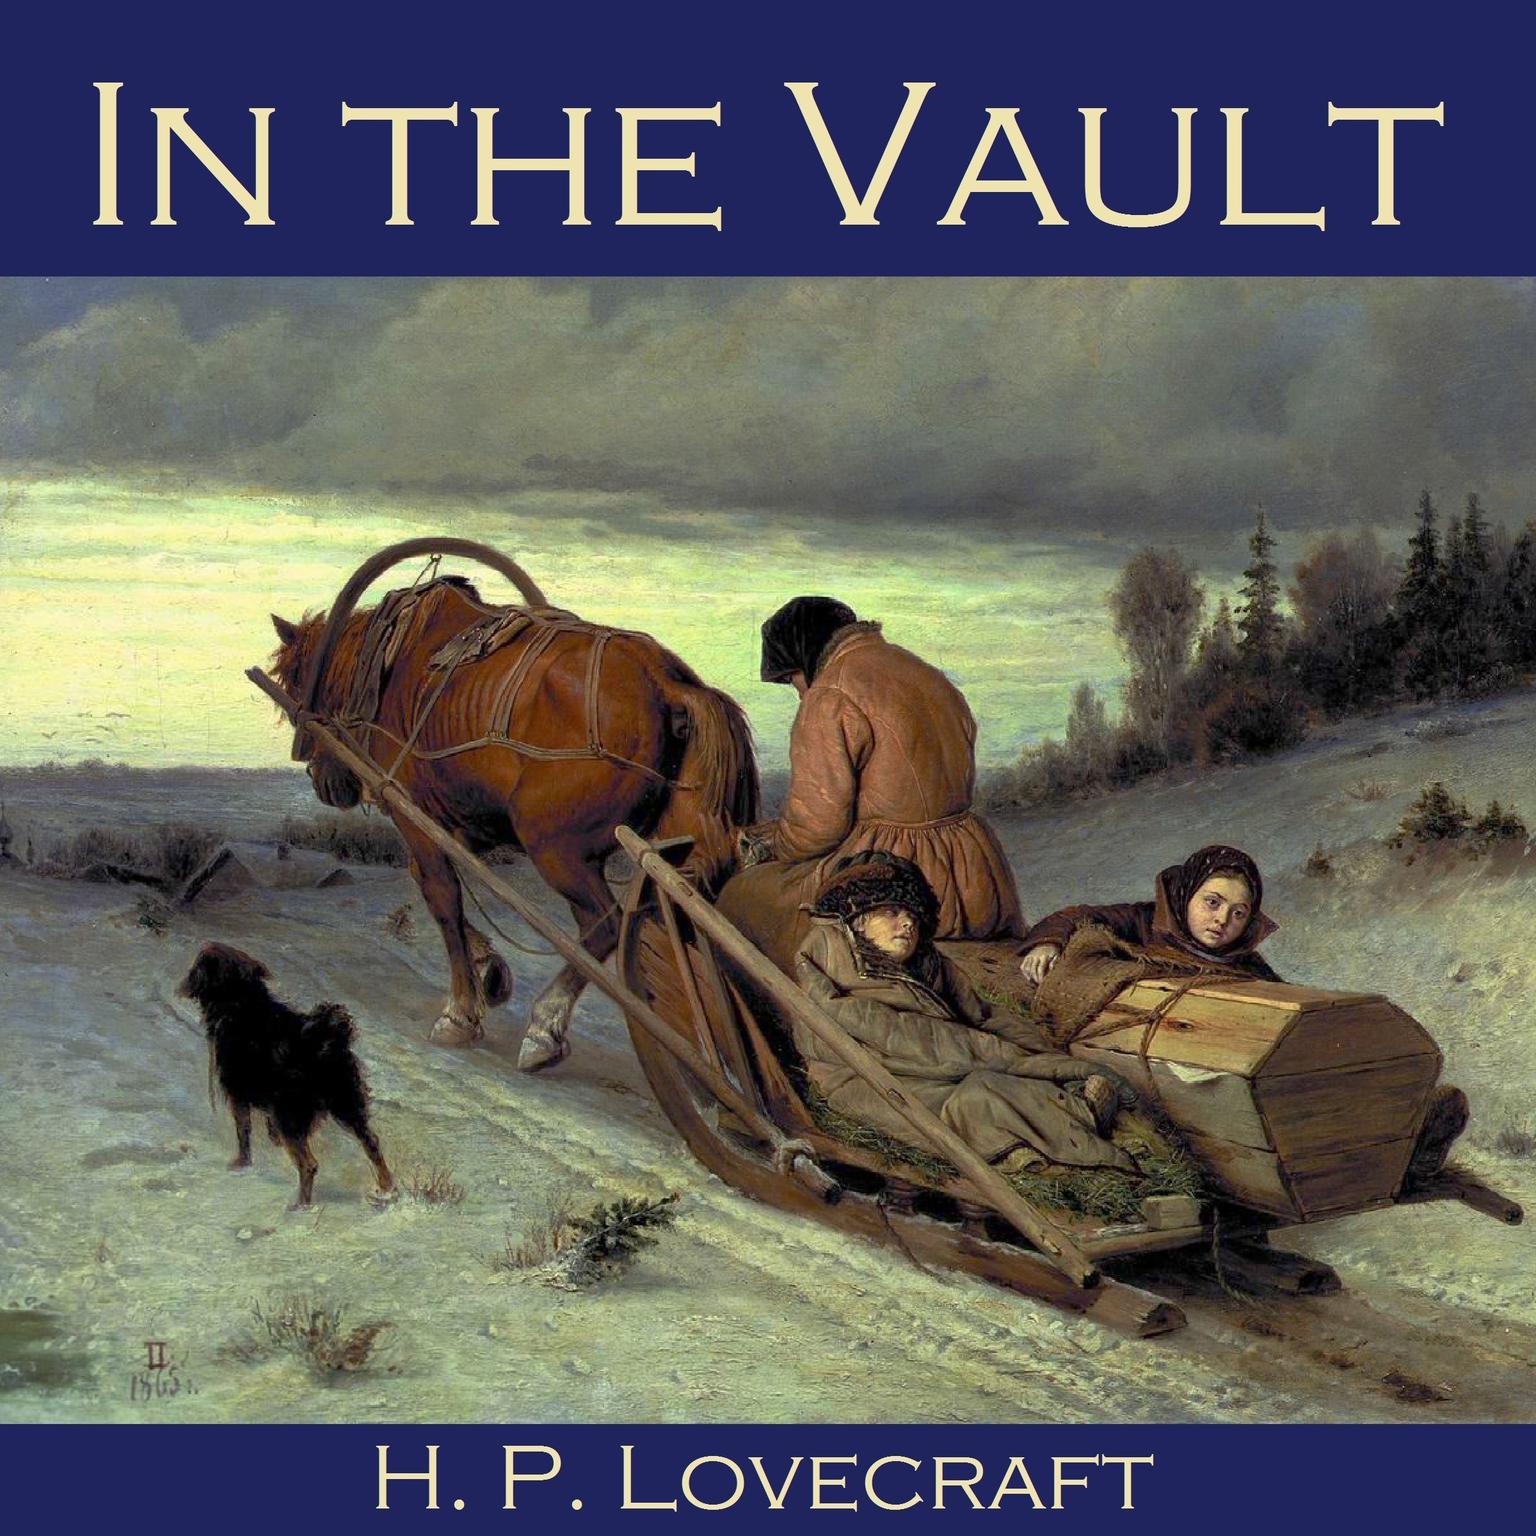 In the Vault Audiobook, by H. P. Lovecraft